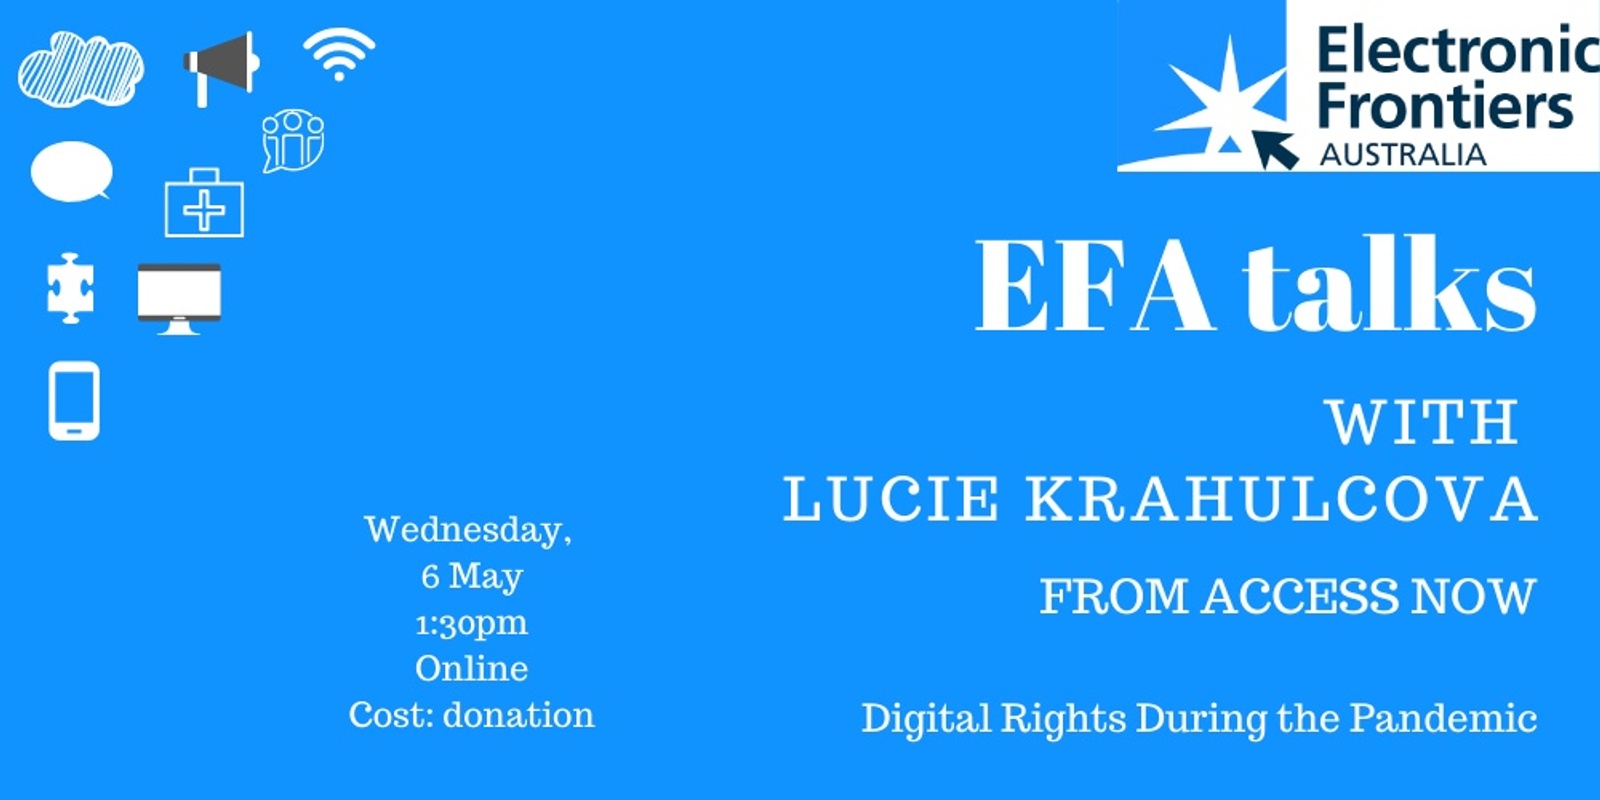 Banner image for EFA talks with Lucie Krahulcova